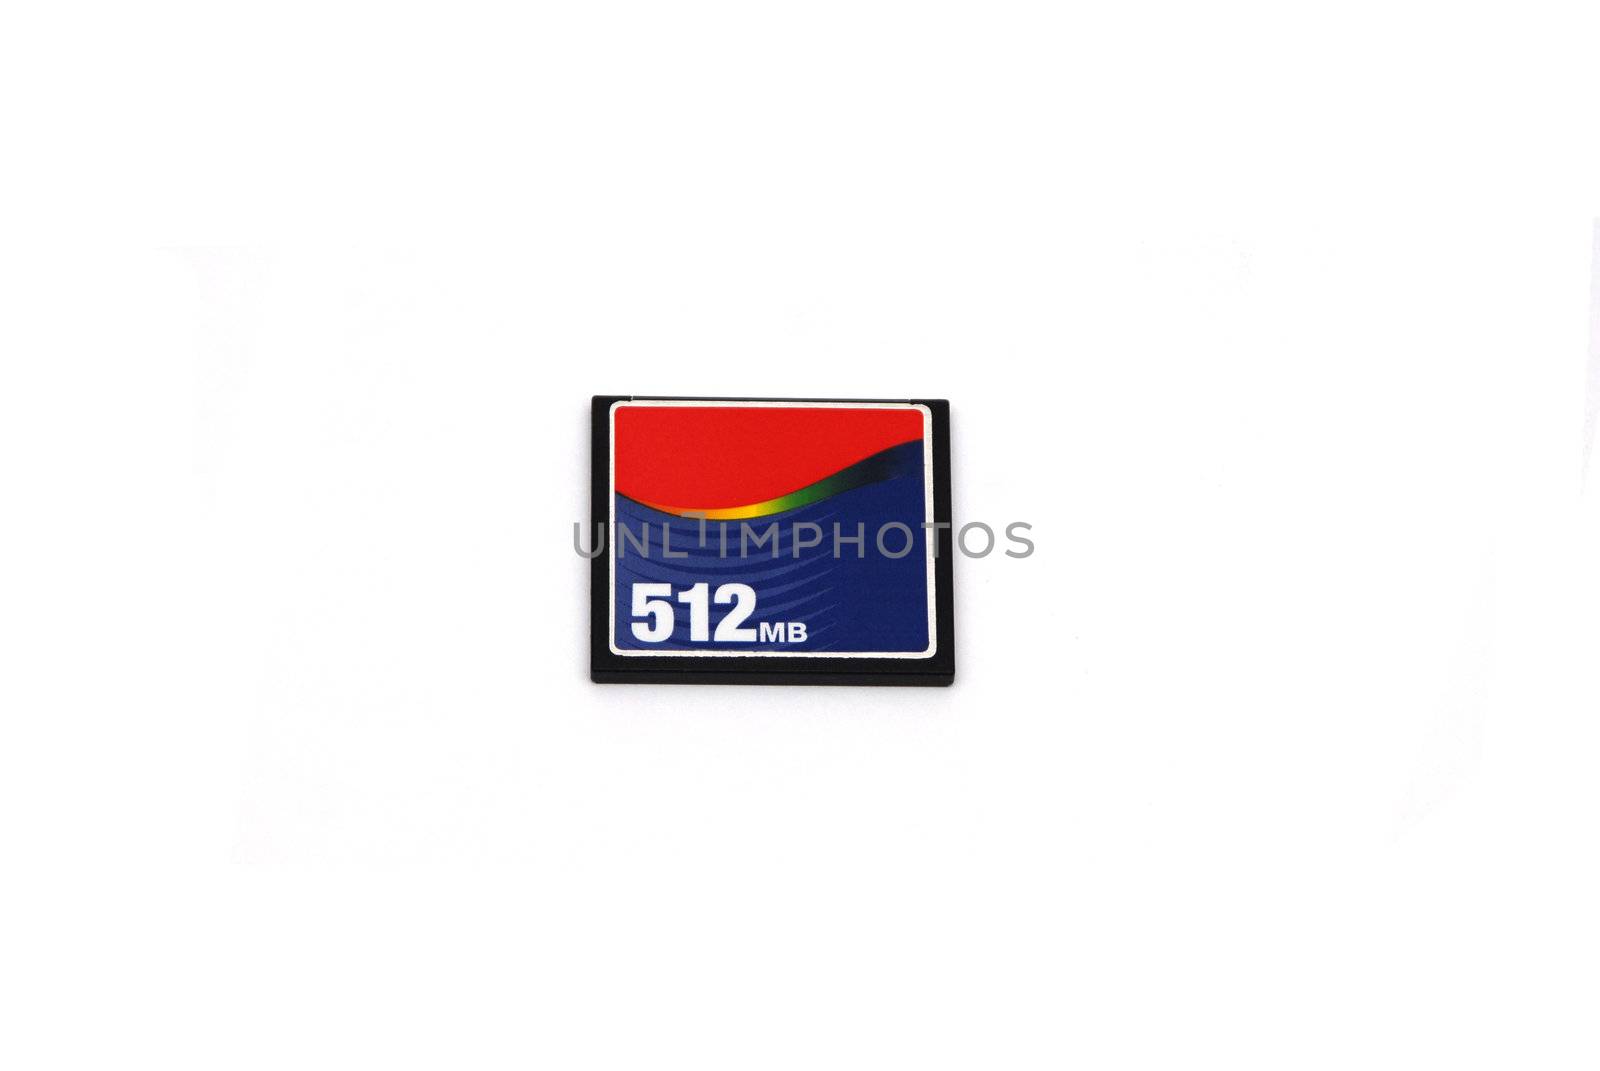 A memory card isoalted on a white background